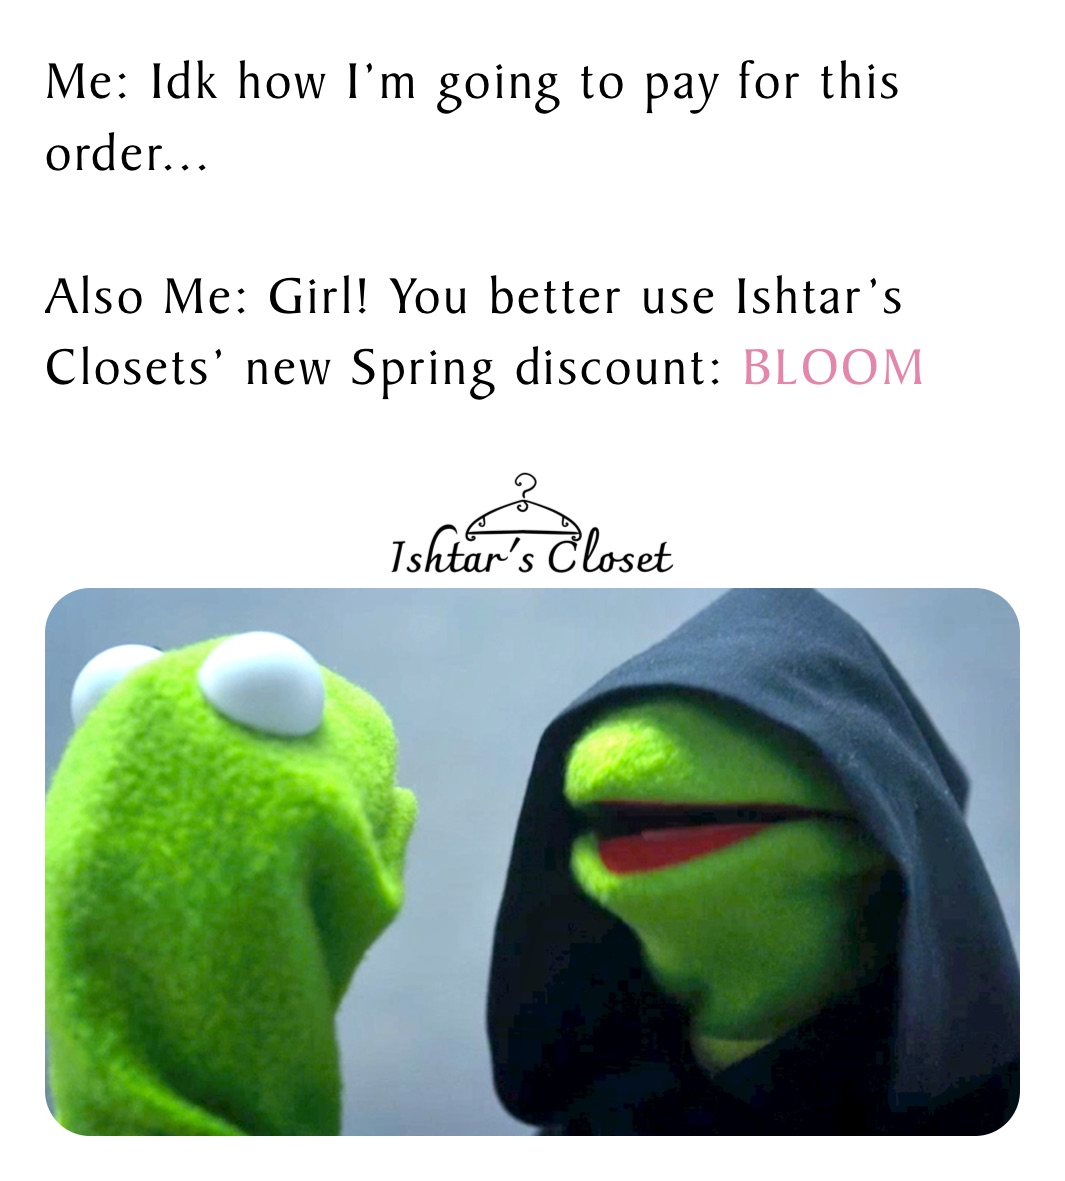 Me: Idk how I’m going to pay for this order...

Also Me: Girl! You better use Ishtar’s Closets’ new Spring discount: BLOOM

